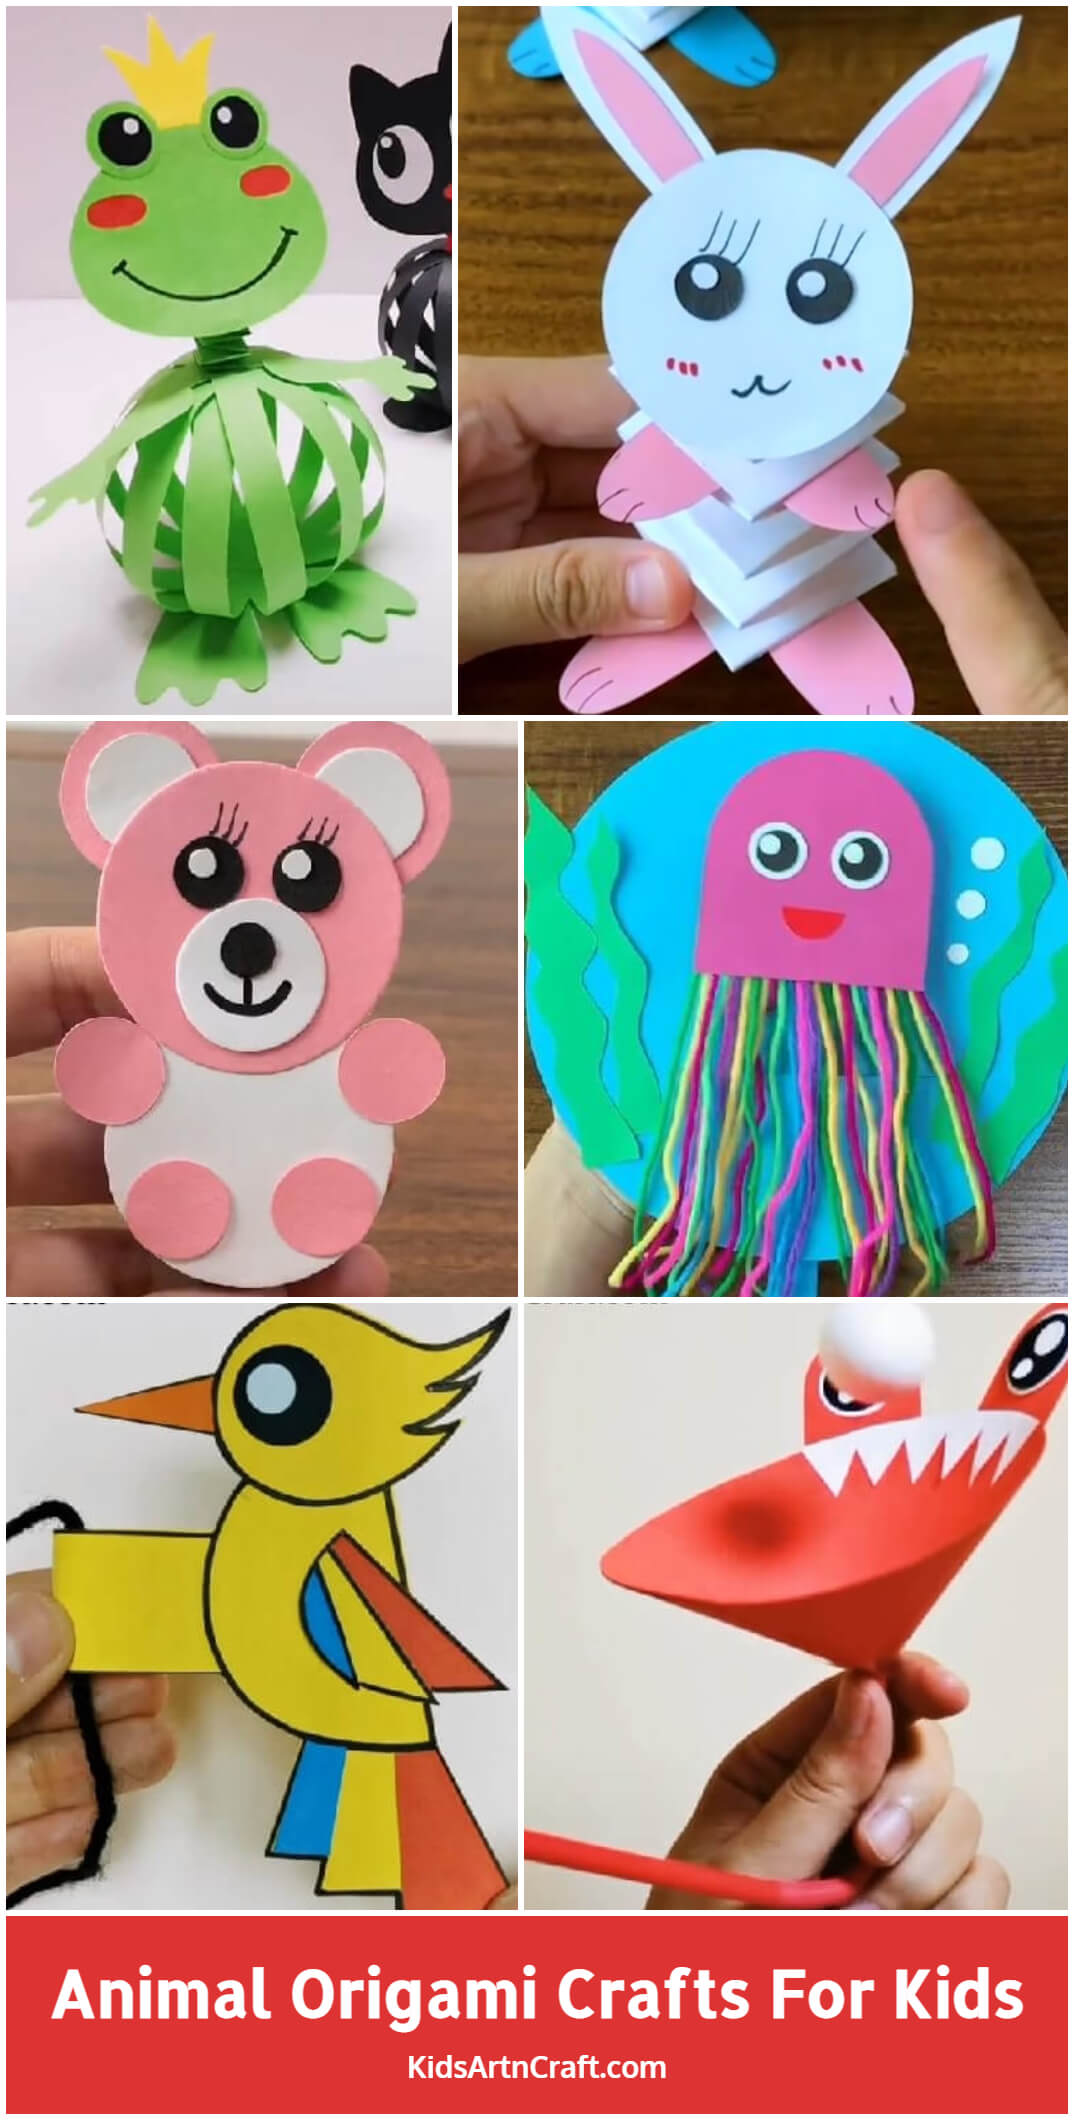 Easy DIY Animal Crafts: An Origami Zoo Of Your Own!